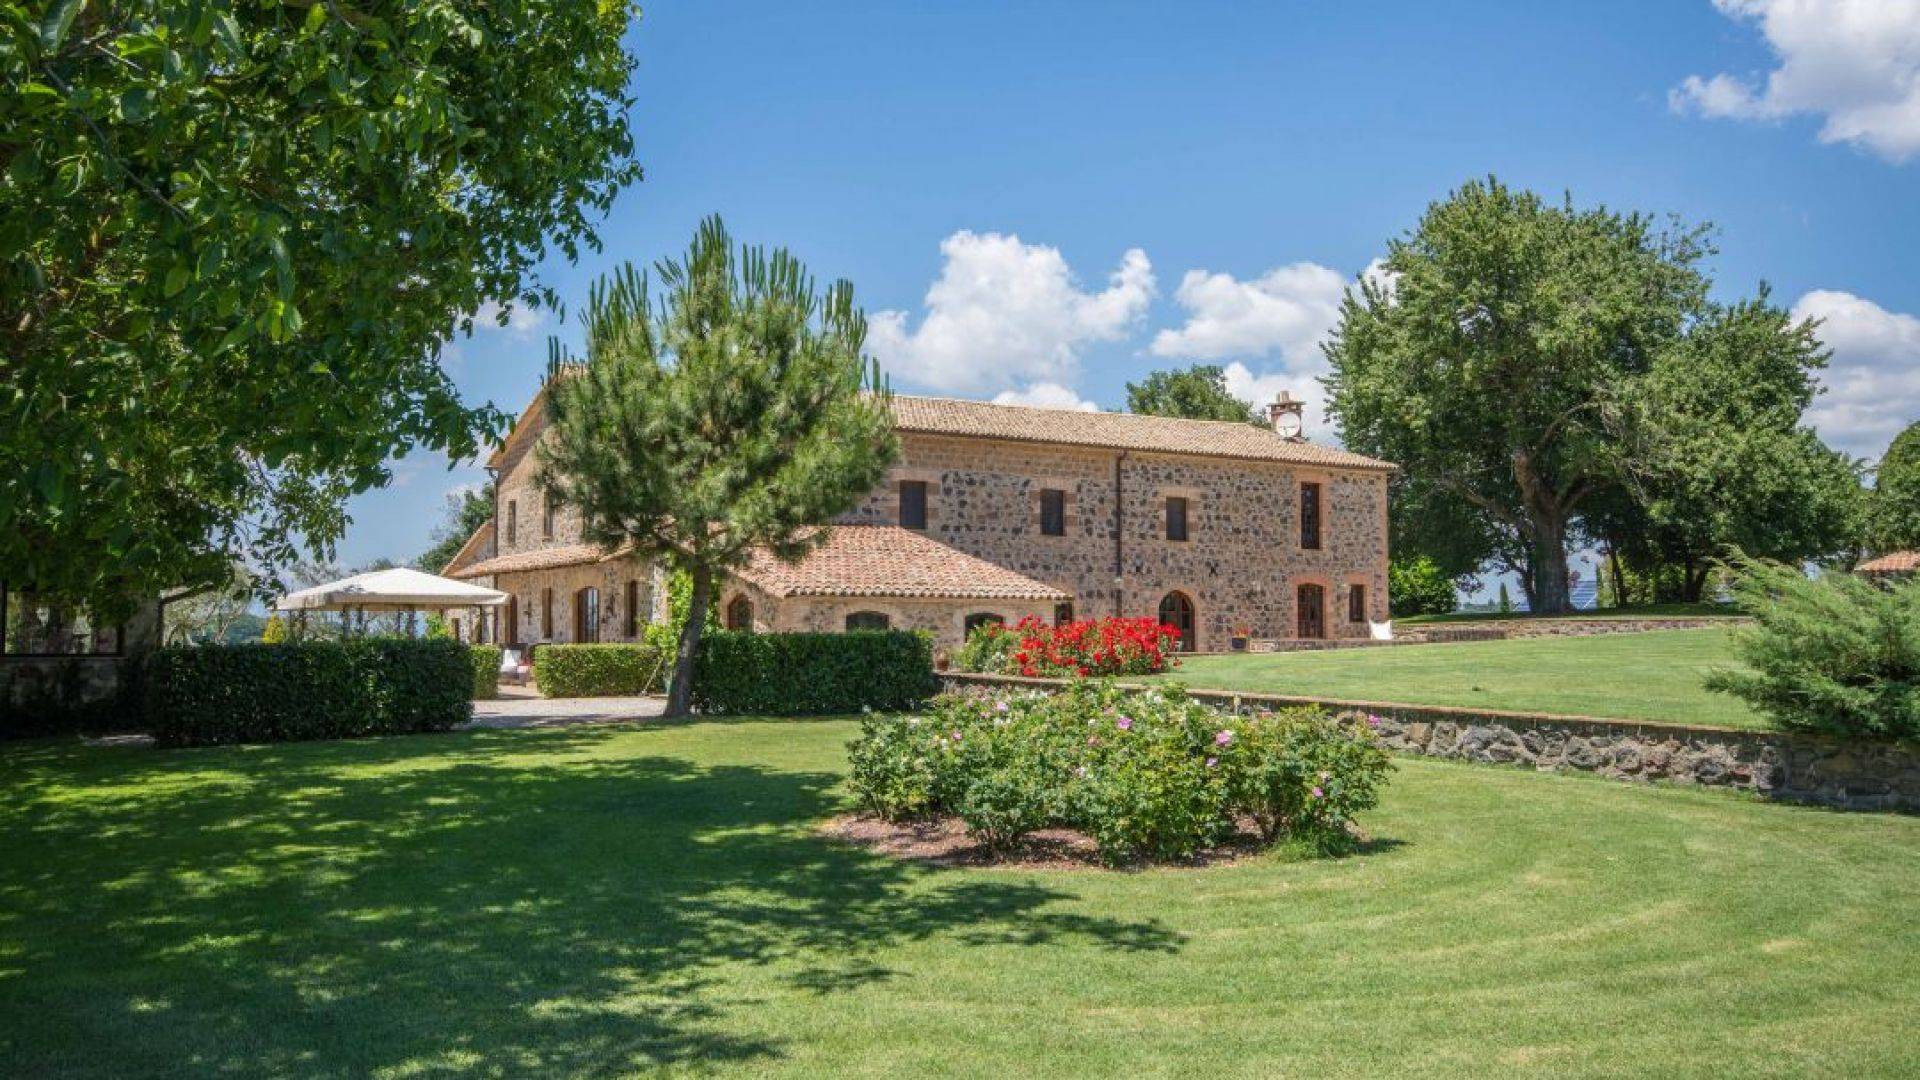 This prestigious stone country house is for sale with annexe, land and swimming pool in San Lorenzo Nuovo, Viterbo.